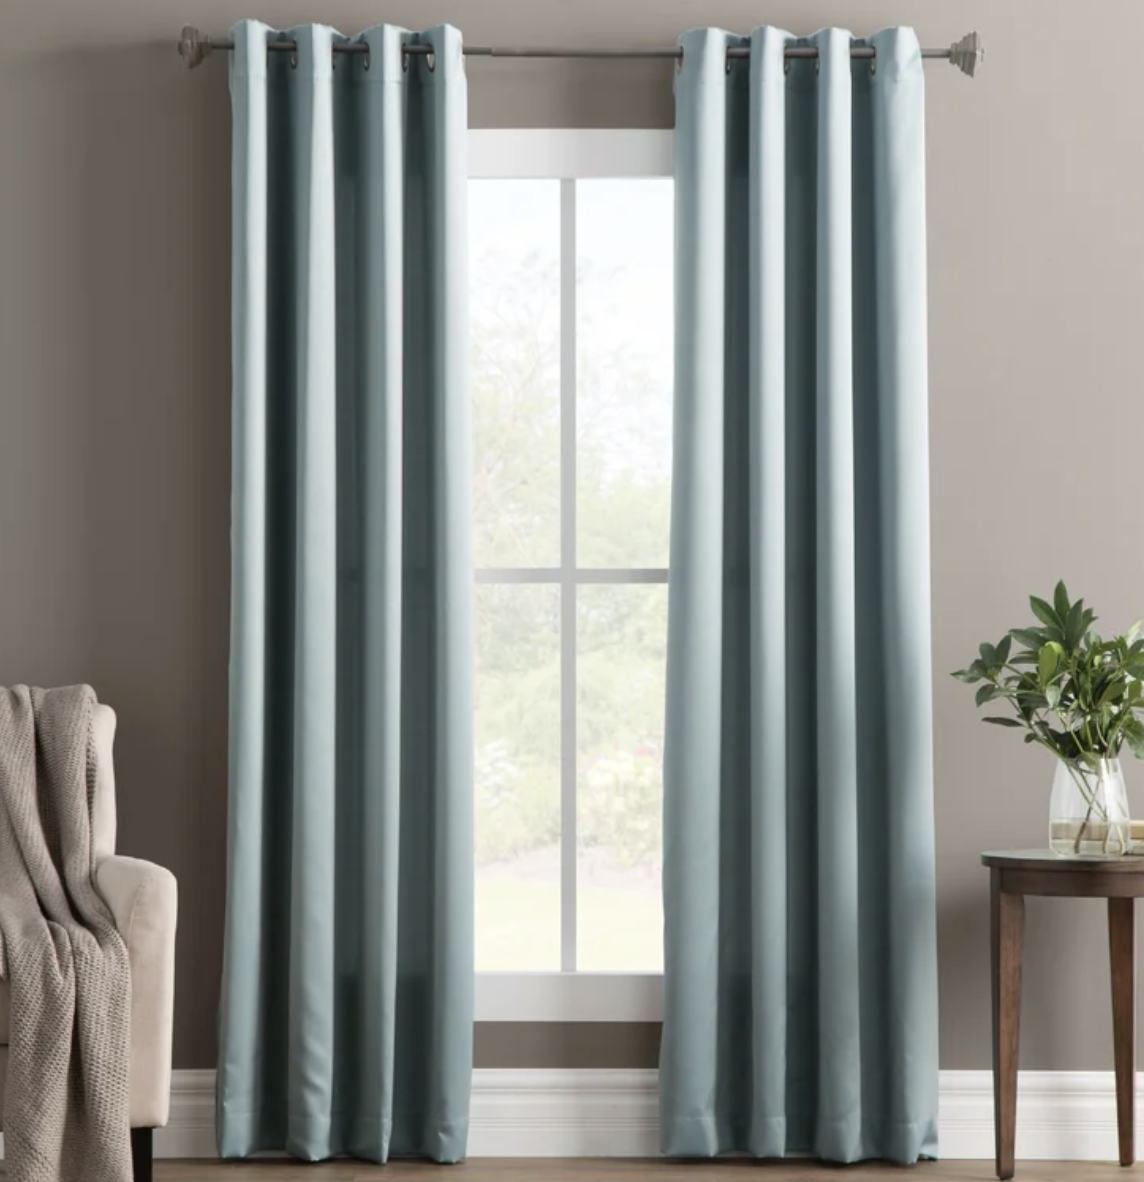 A set of the curtains on a window in a room